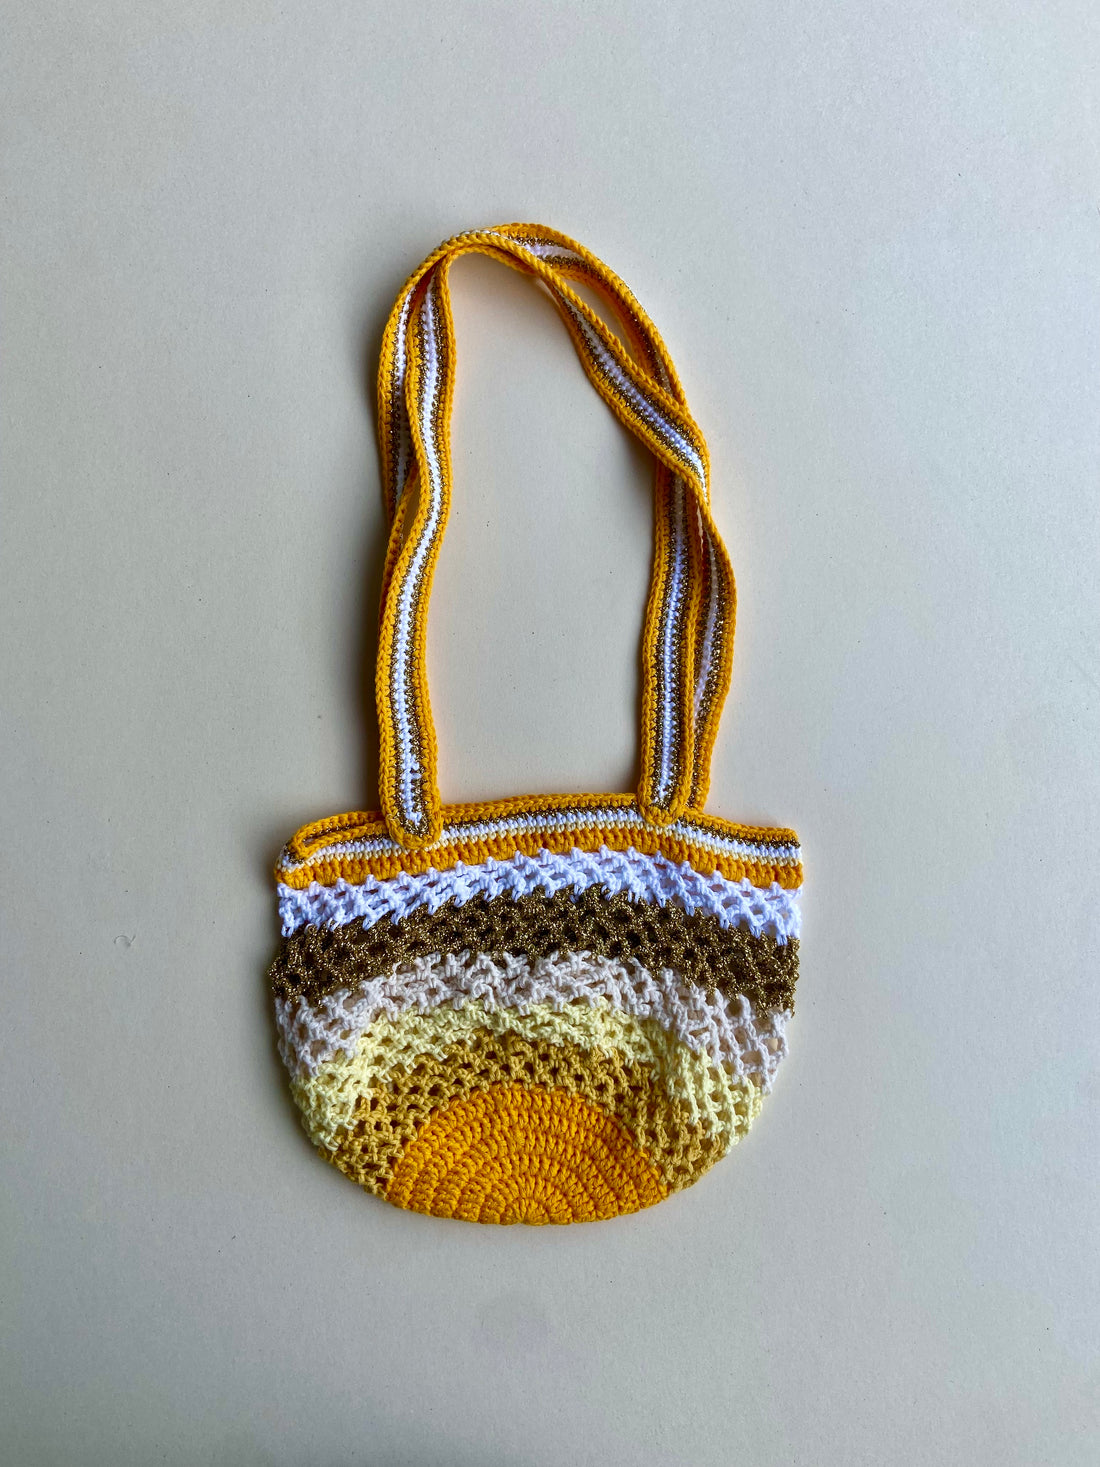 Anabaum bag Lil Sis Daffodil in shades of yellow handmade from organic cotton luxury